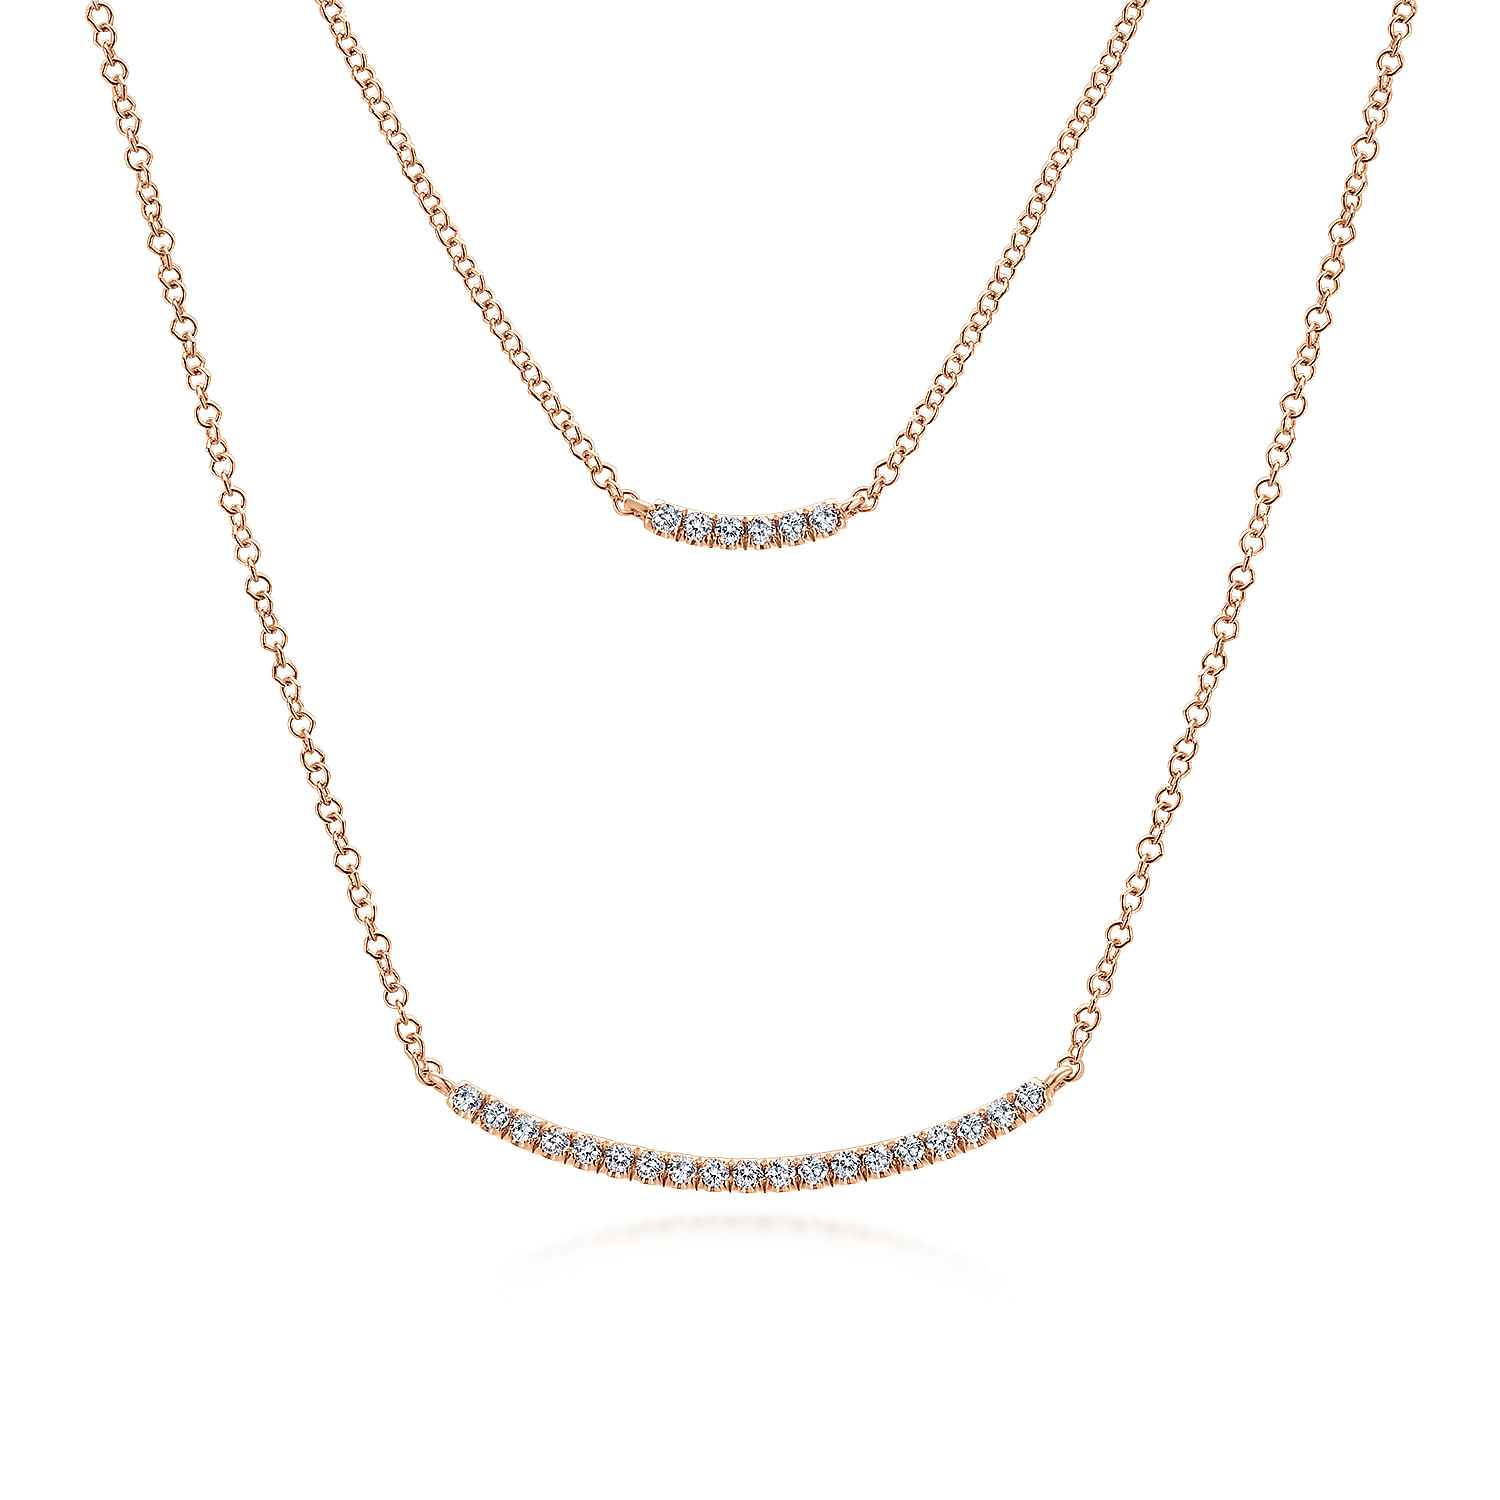 Two Strand 14K Rose Gold Curved Diamond Bar Necklace